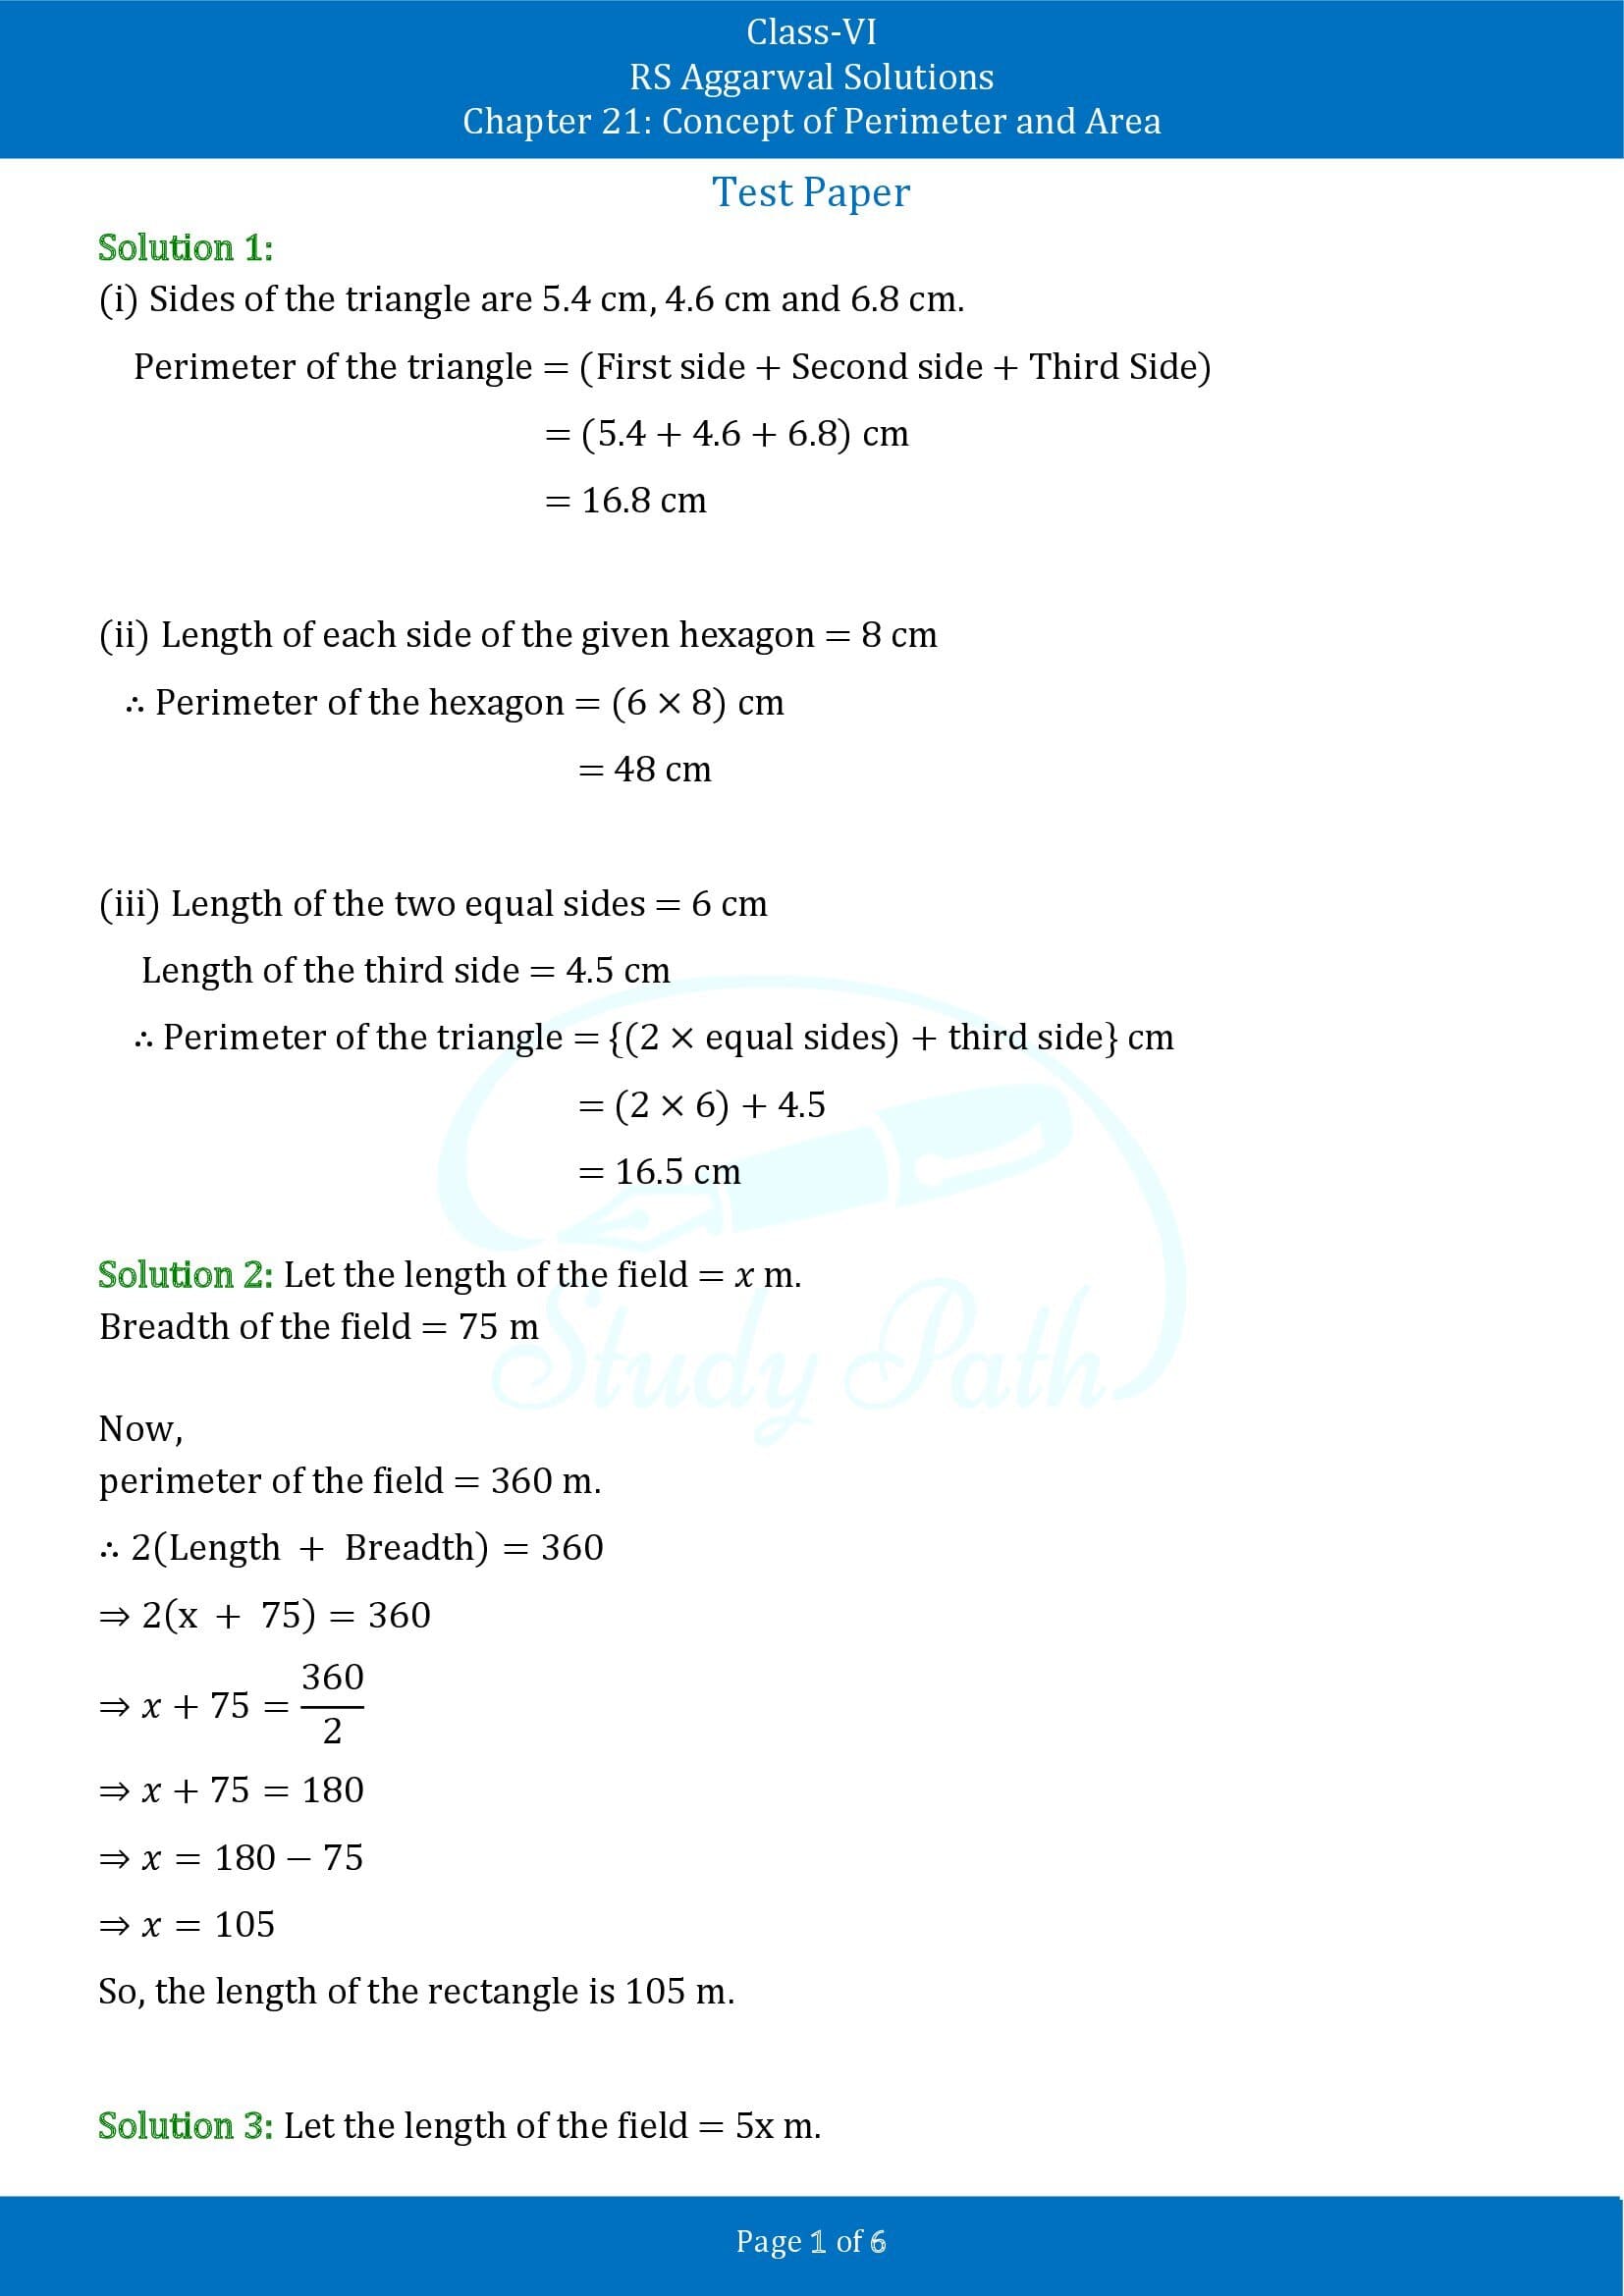 RS Aggarwal Solutions Class 6 Chapter 21 Concept of Perimeter and Area Test Paper 00001